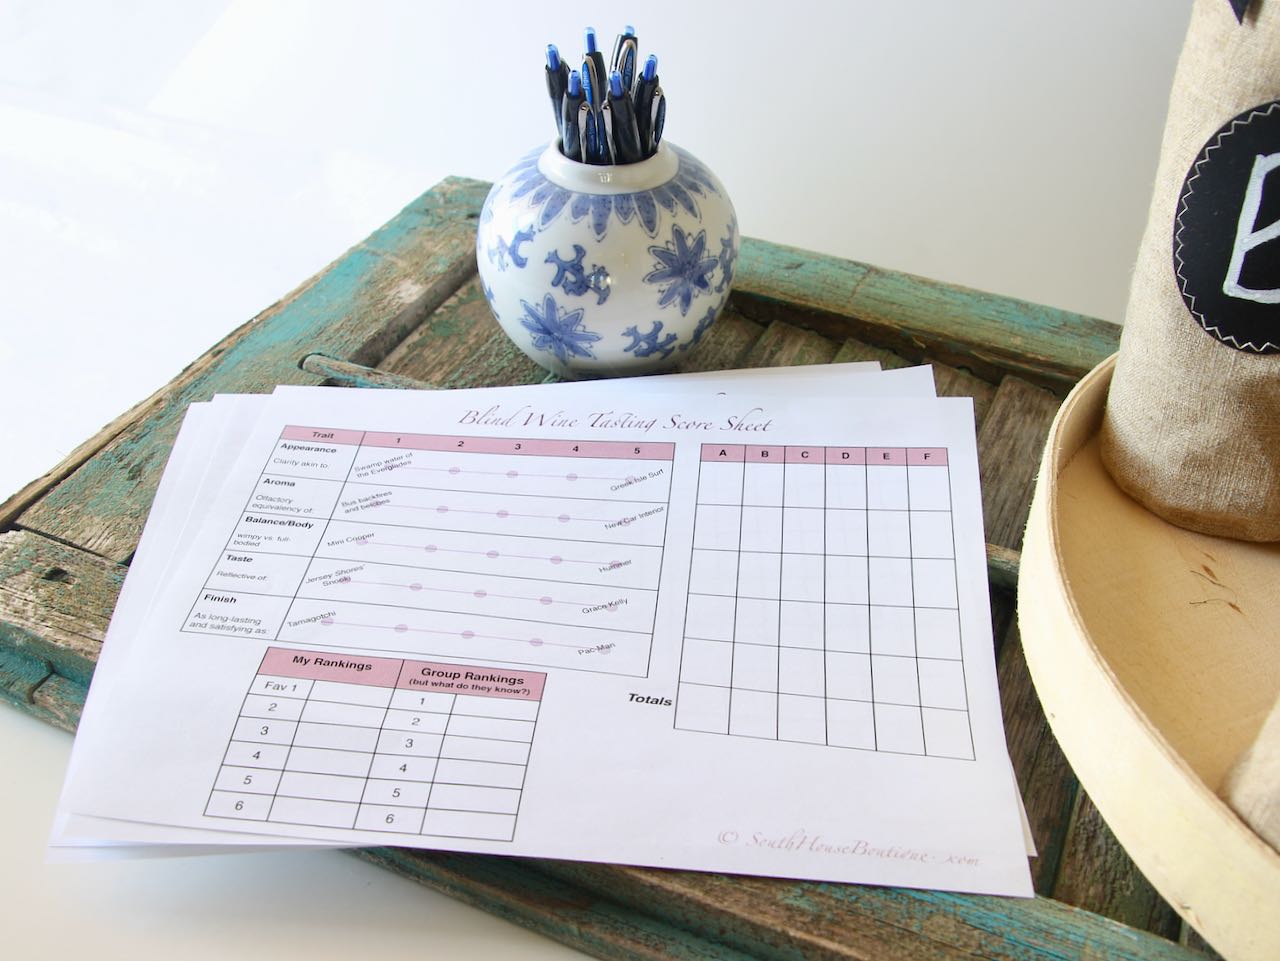 stack of pop-culture based scorecards for a blind wine tasting party shown with a jug of pens